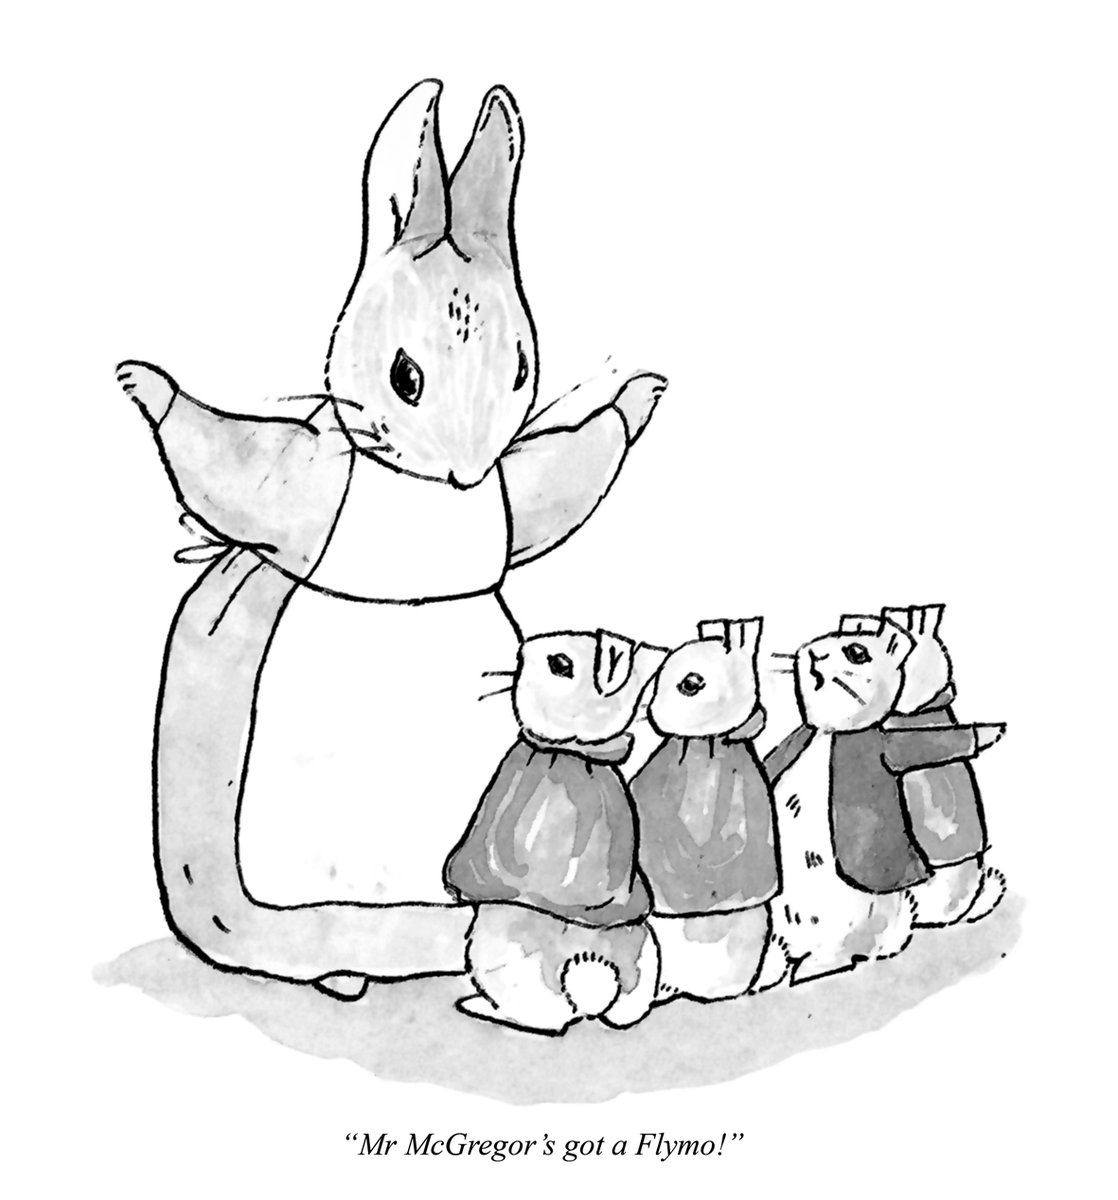 Today's PUNCH Cartoon Classic. Now the lawn mowers are coming out, be careful out there! “Mr McGregor’s got a Flymo!” Neil Bennett 1989 #rabbits #bunnies #PeterRabbit #BeatrixPotter #books #literary #literature #childrensbooks